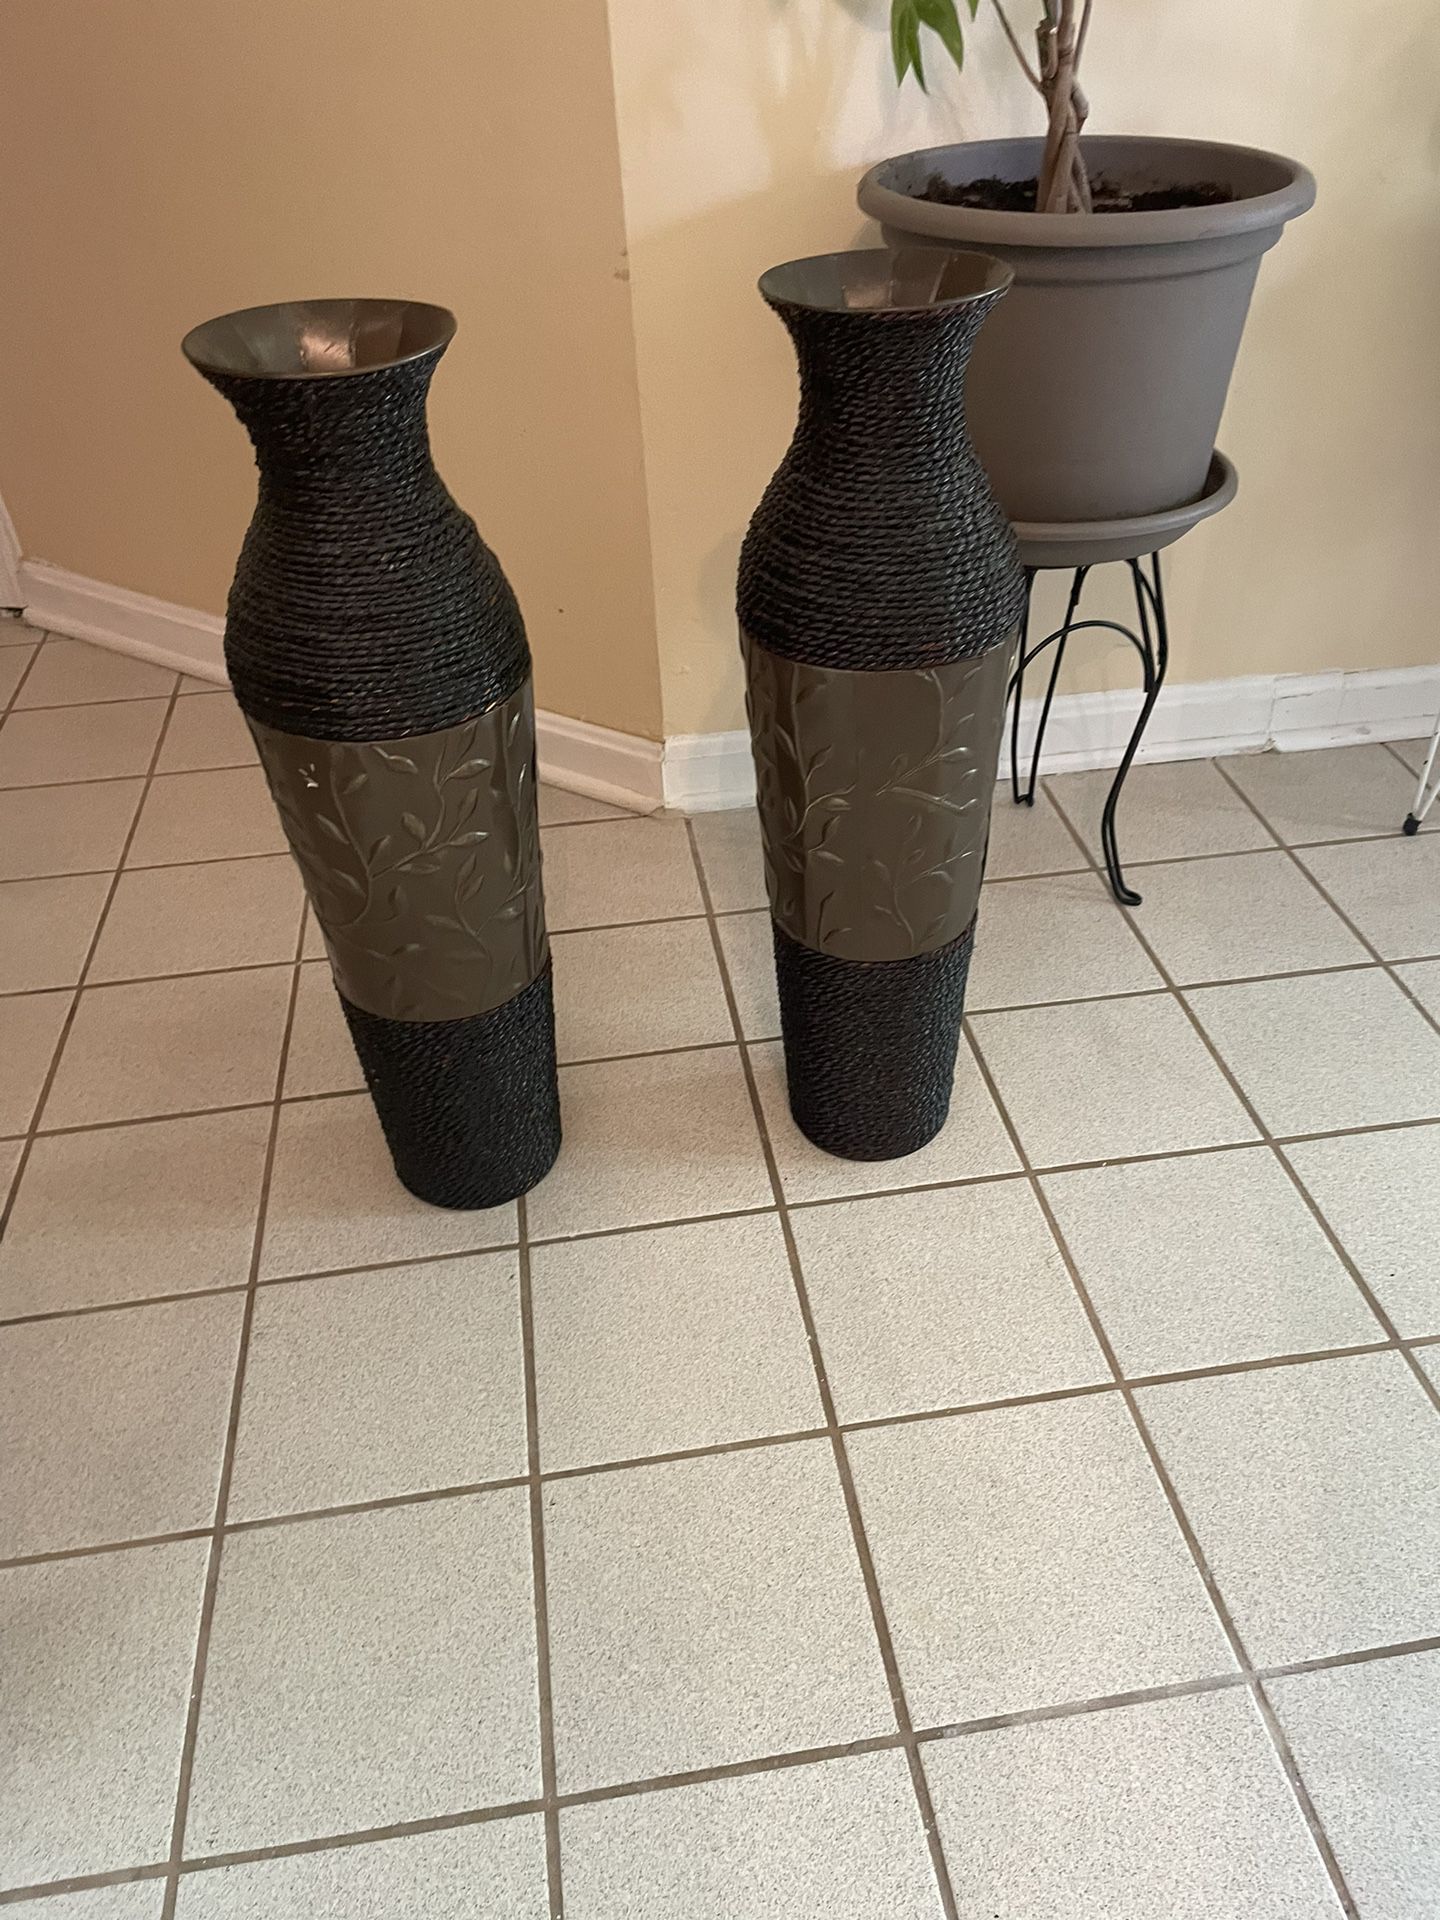 Two Flower Vase And  Rug